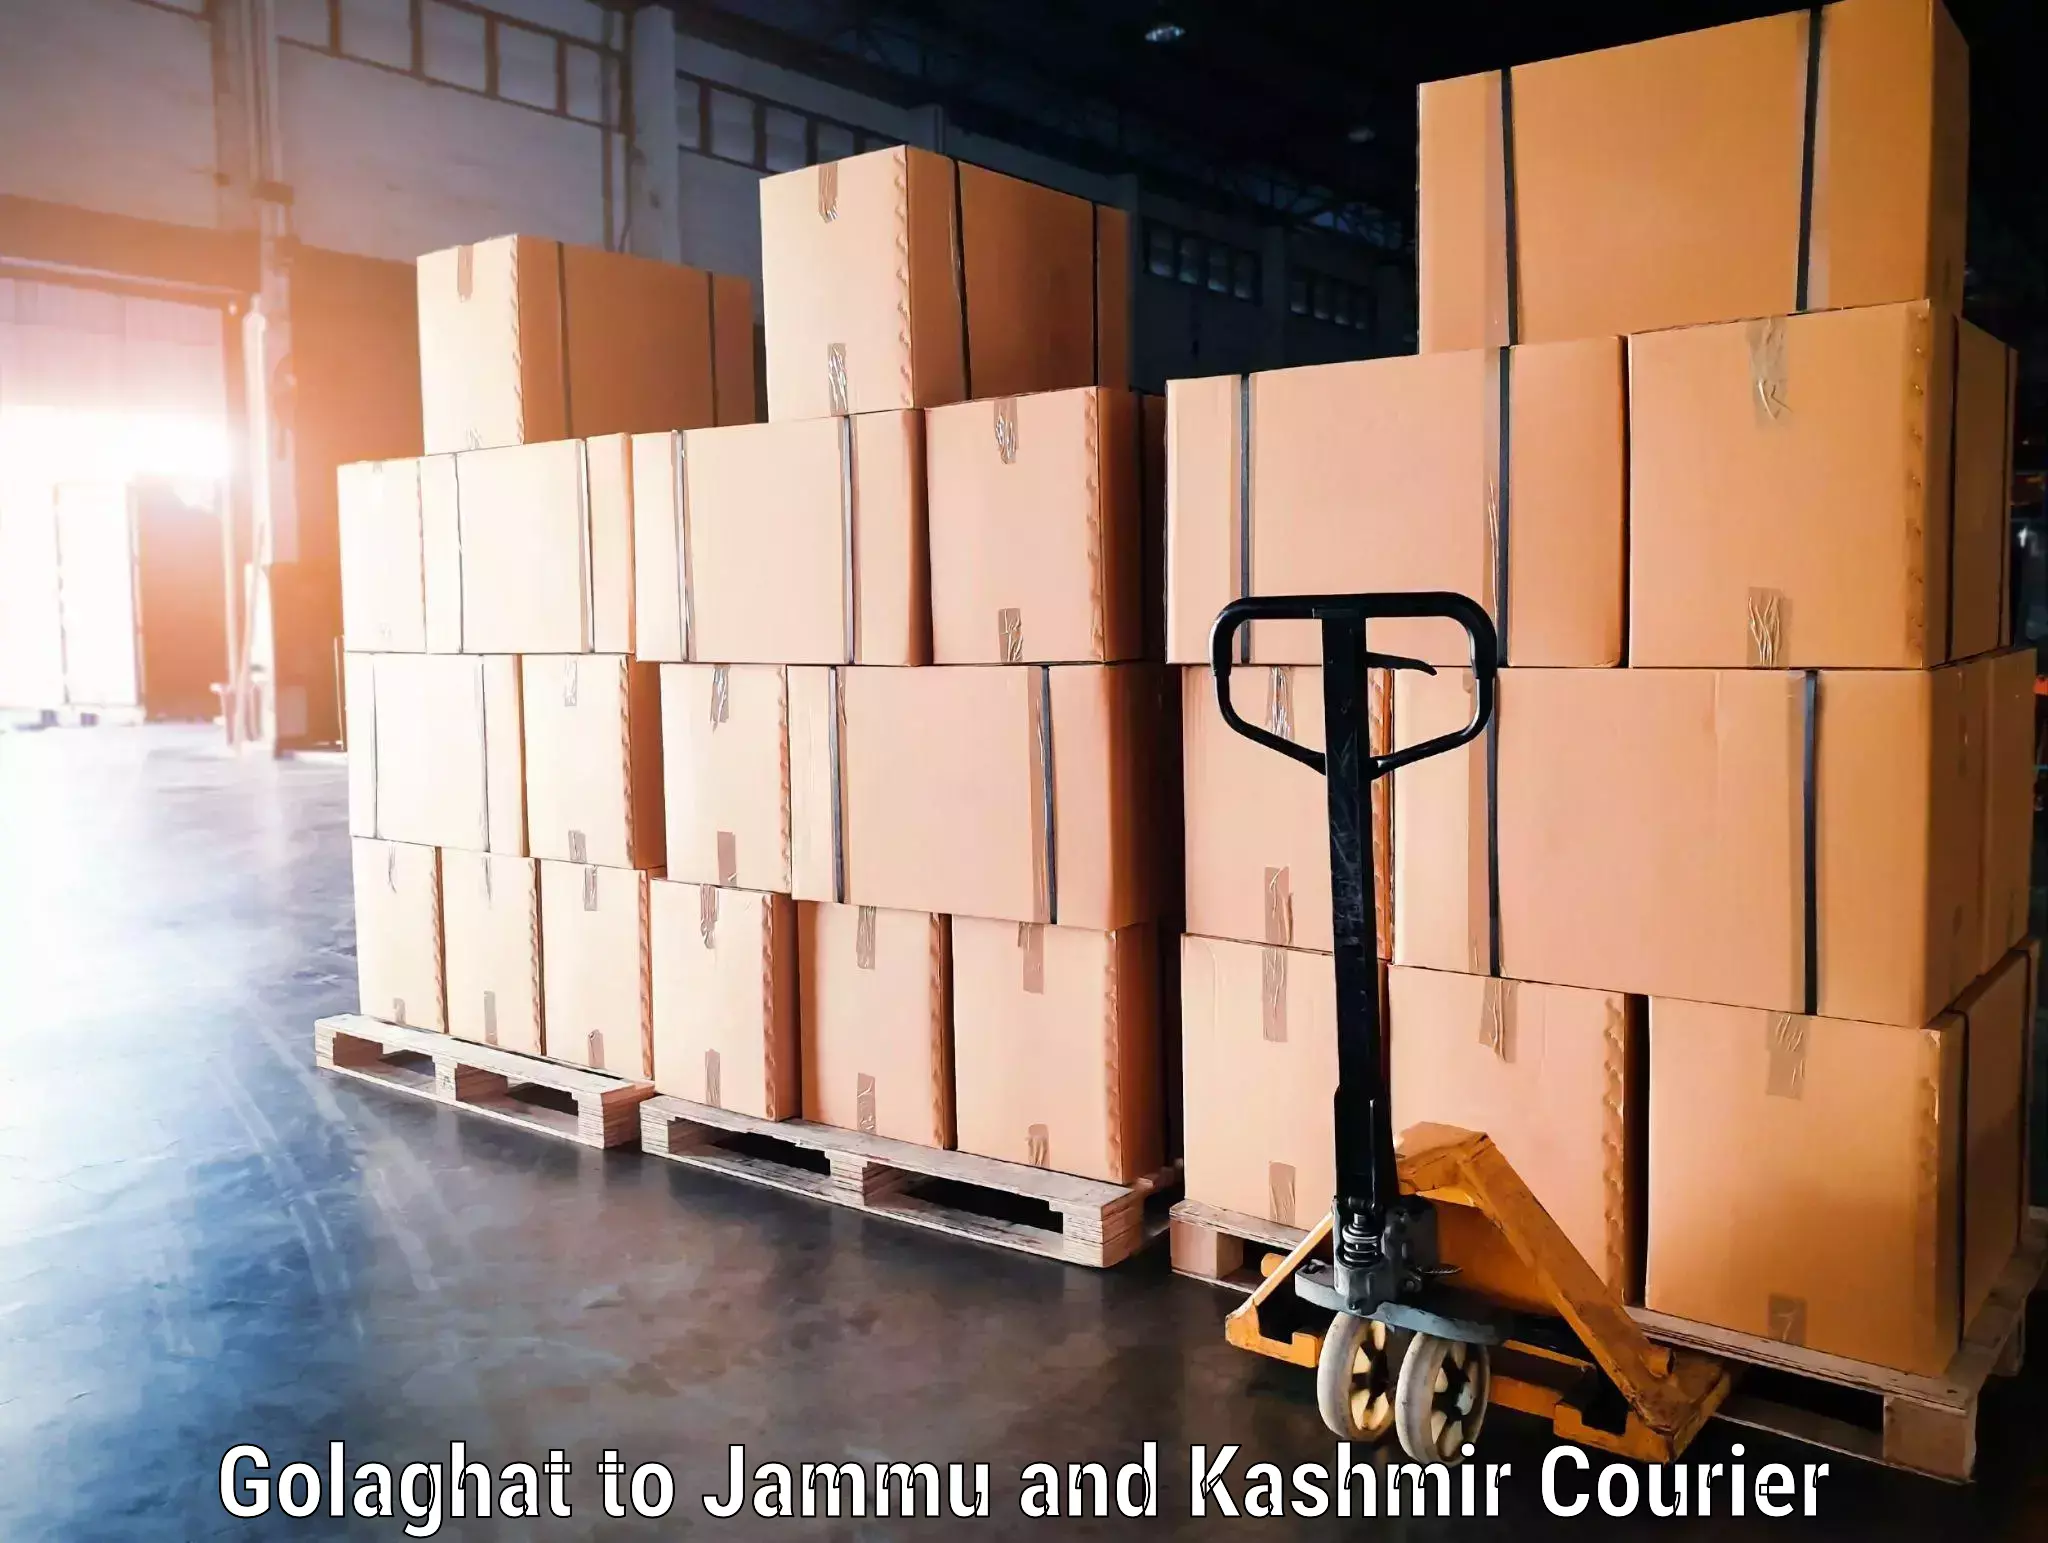 Luggage shipment specialists Golaghat to Jammu and Kashmir